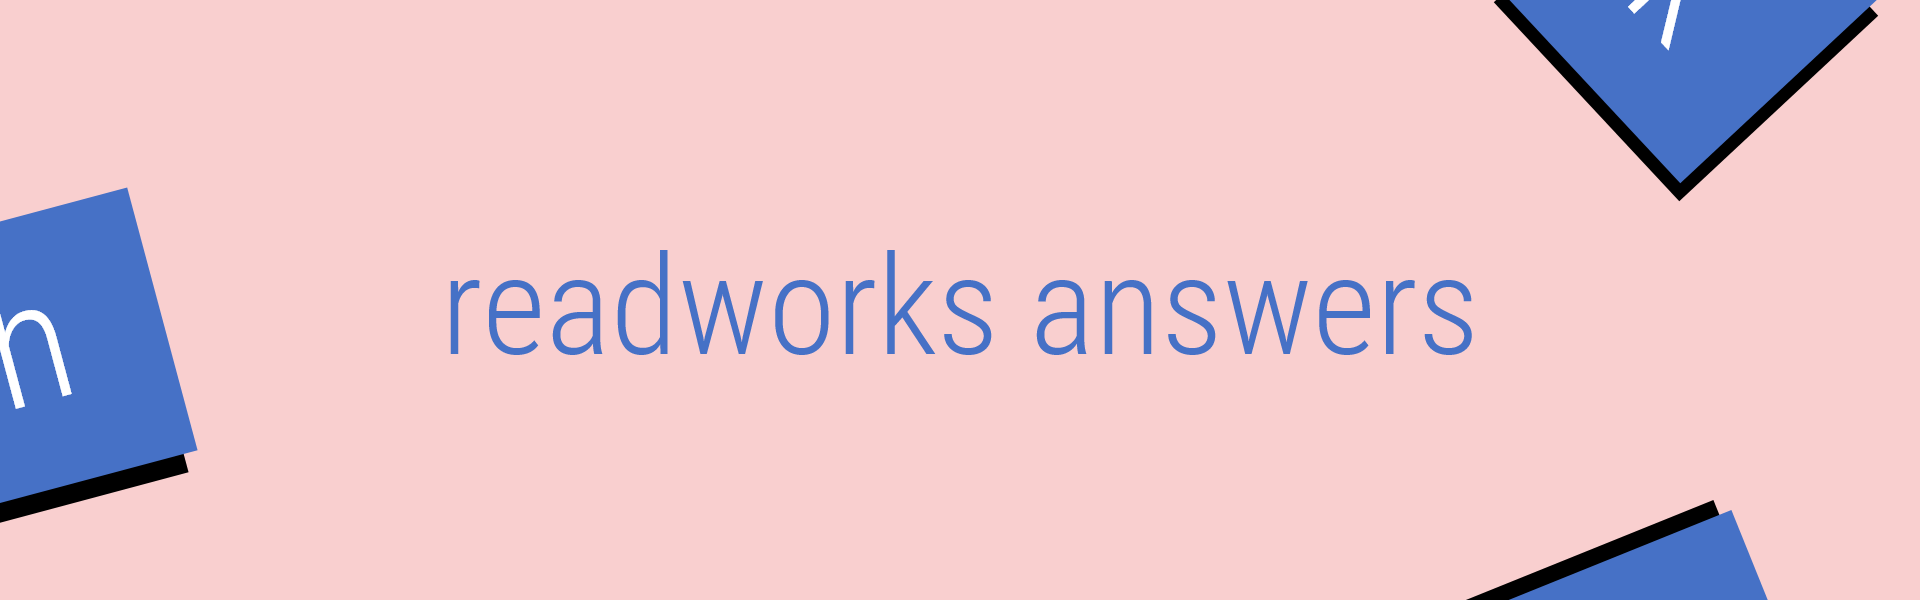 readworks answers